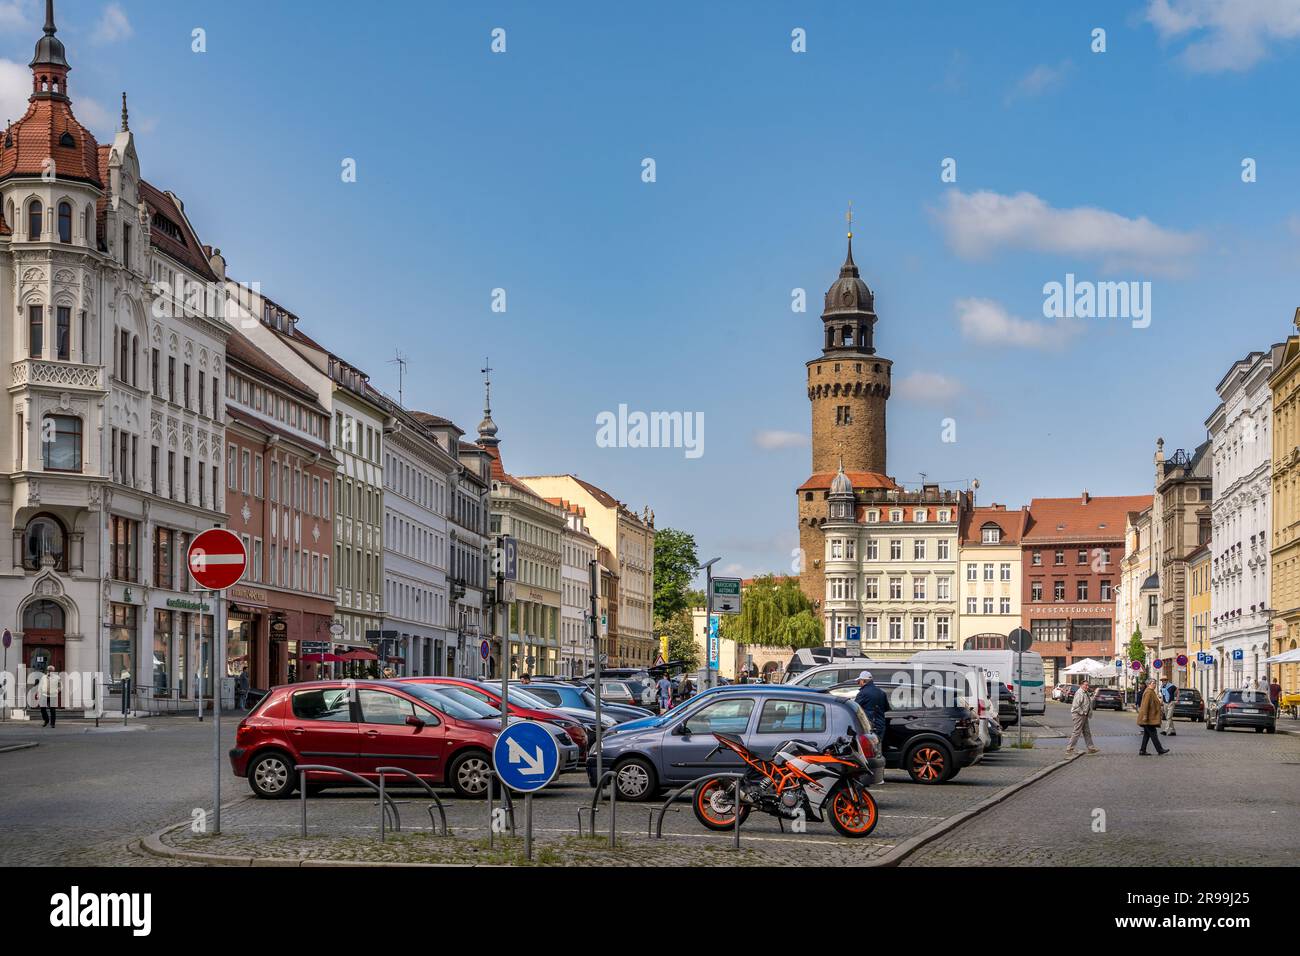 Upper market square in Gorlitz with baroque town houses Stock Photo